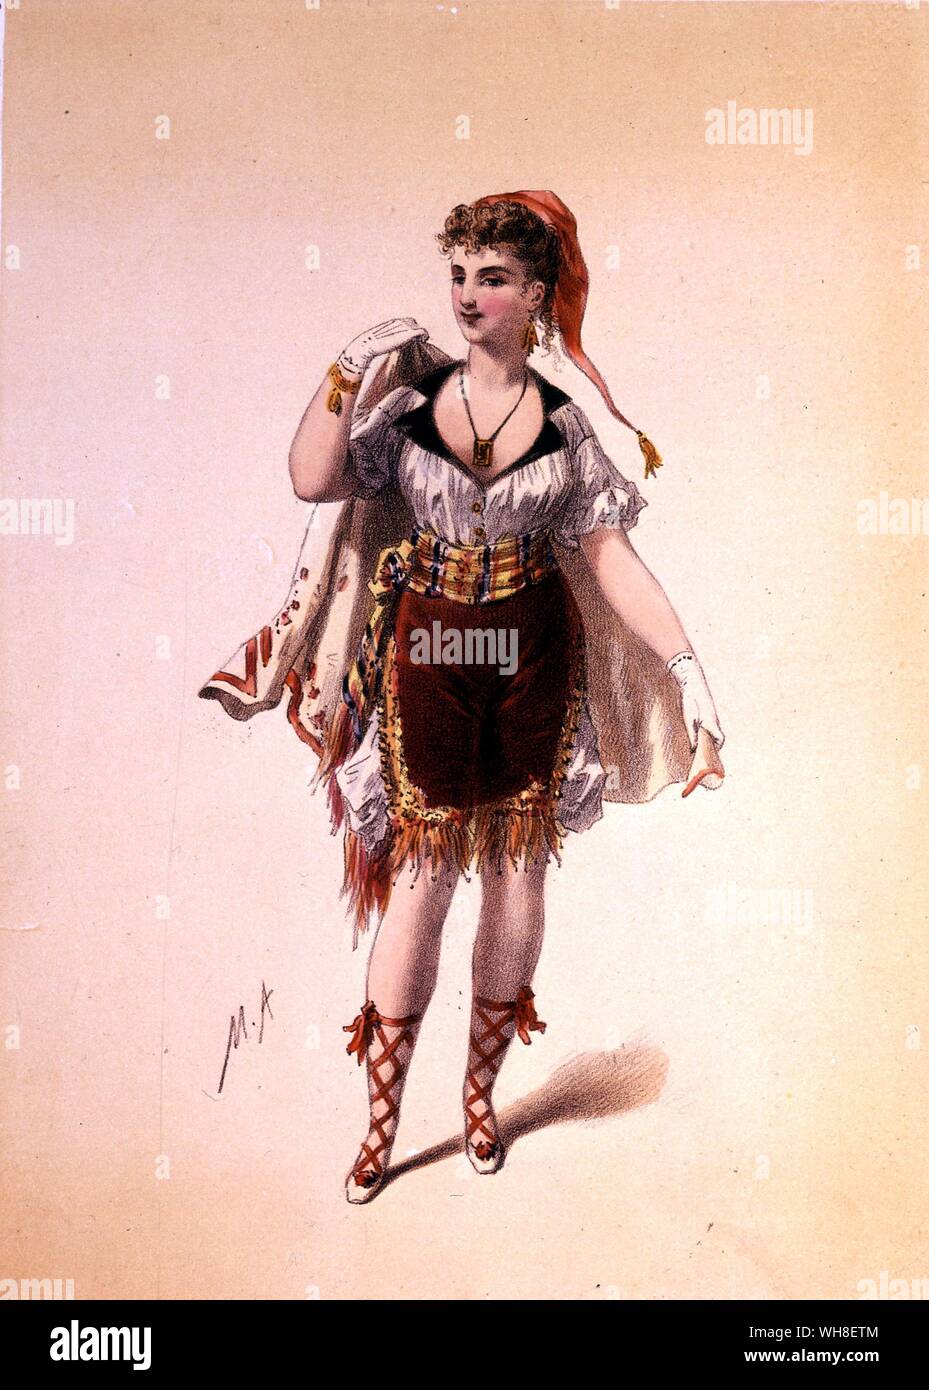 Pecheur Napolitain (Neapolitan Pechor). Costumes des theatres (Costumes of the theatres) 1860. . La Vie Parisienne by Joanna Richardson (1860) page 91. La Vie Parisienne (Parisian Life), by Jacques Offenbach (1819-1880) is a five-act opera about cosmopolitan life in Paris in the 1860s. Jacques Offenbach was a German-born, French composer and cellist, and one of the originators of the operetta form, a precursor of the modern musical comedy. . . . Stock Photo